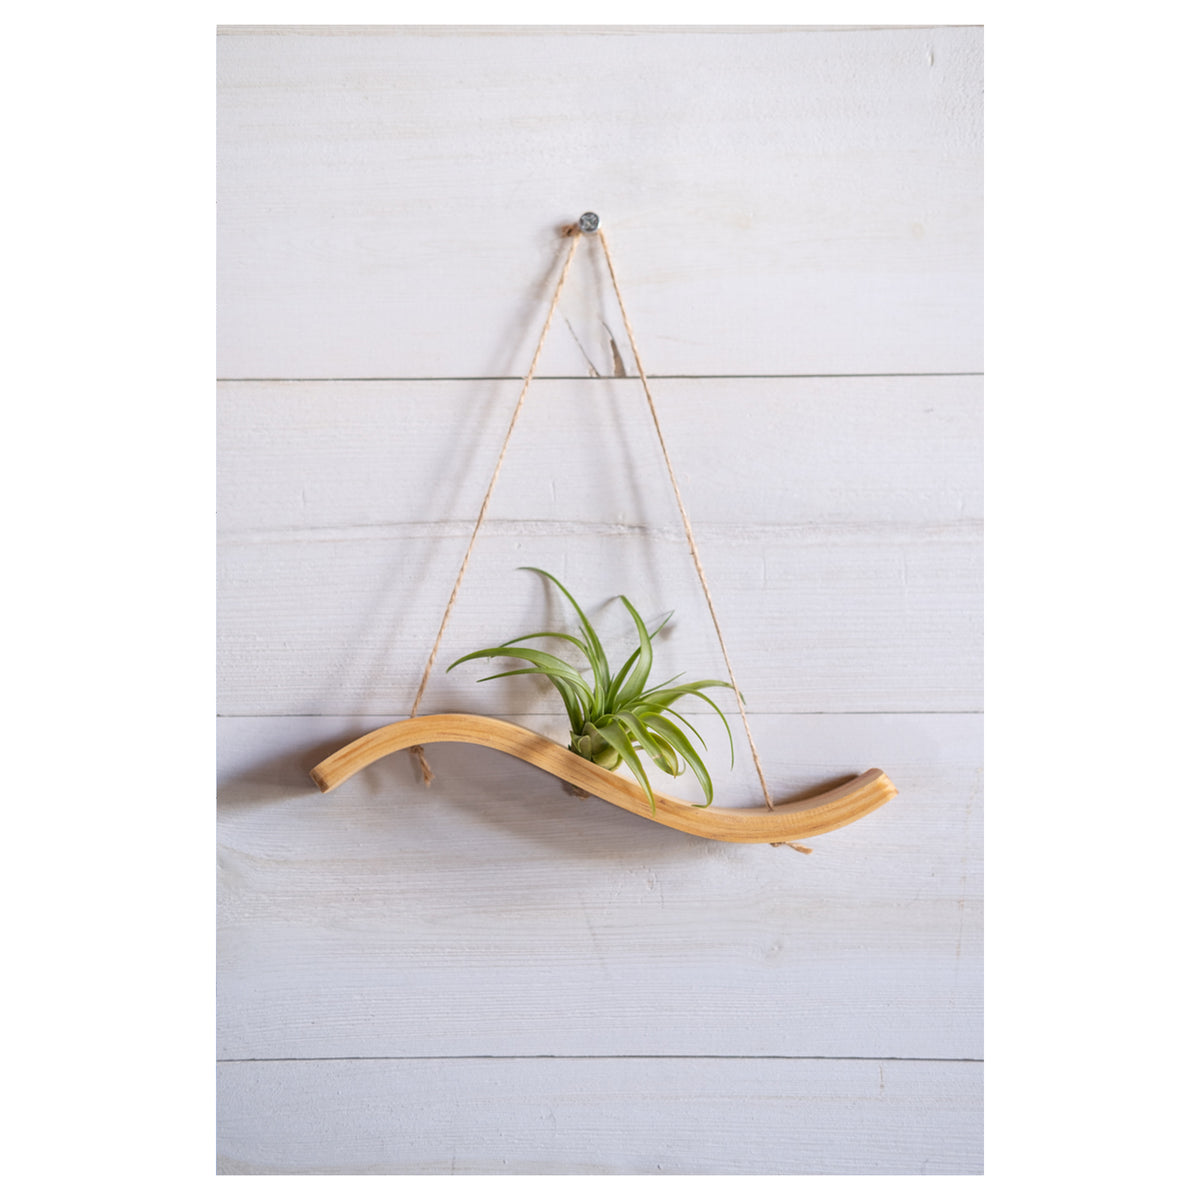 a wooden bent wood wave shaped air plant holder hung with jute